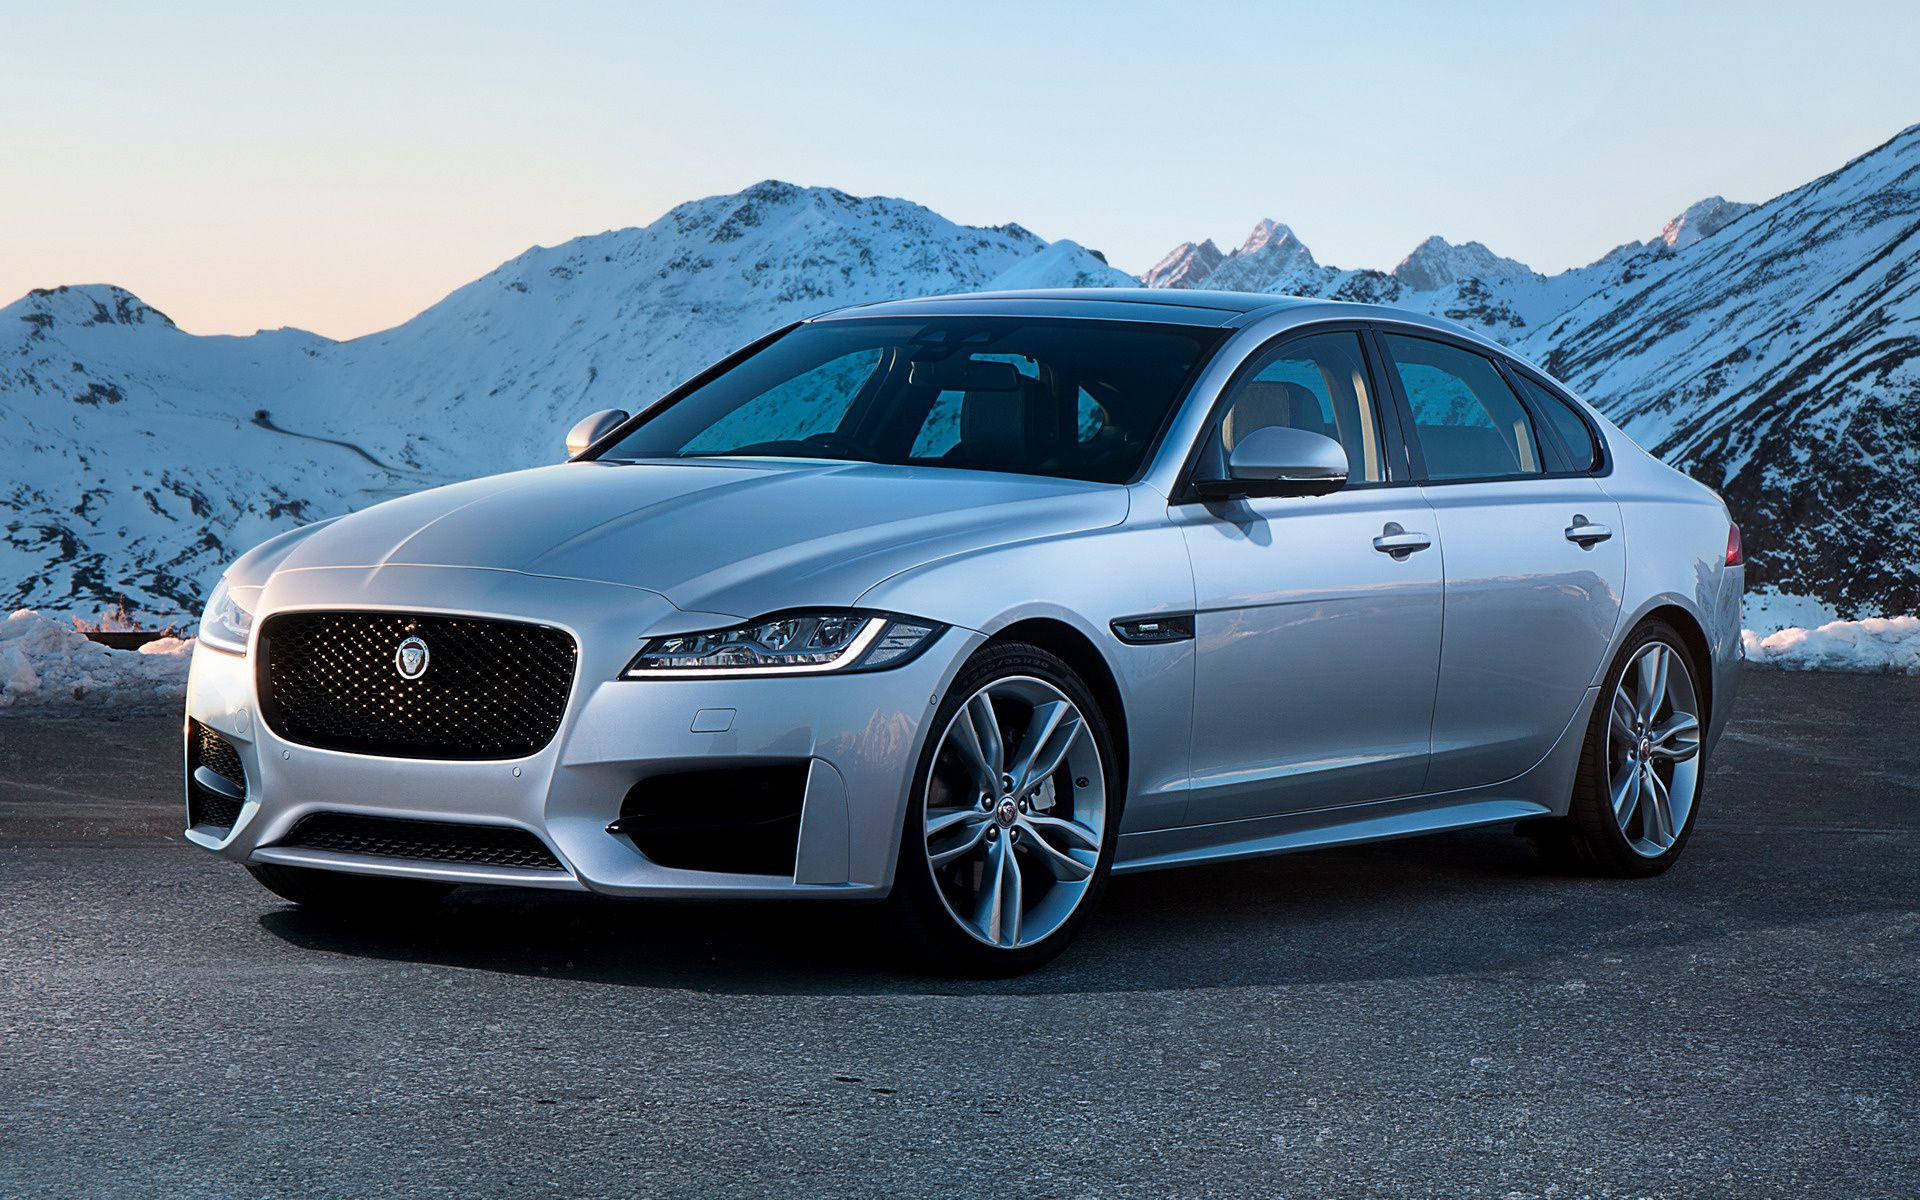 Silver Jaguar Car And Snowy Mountains Wallpaper